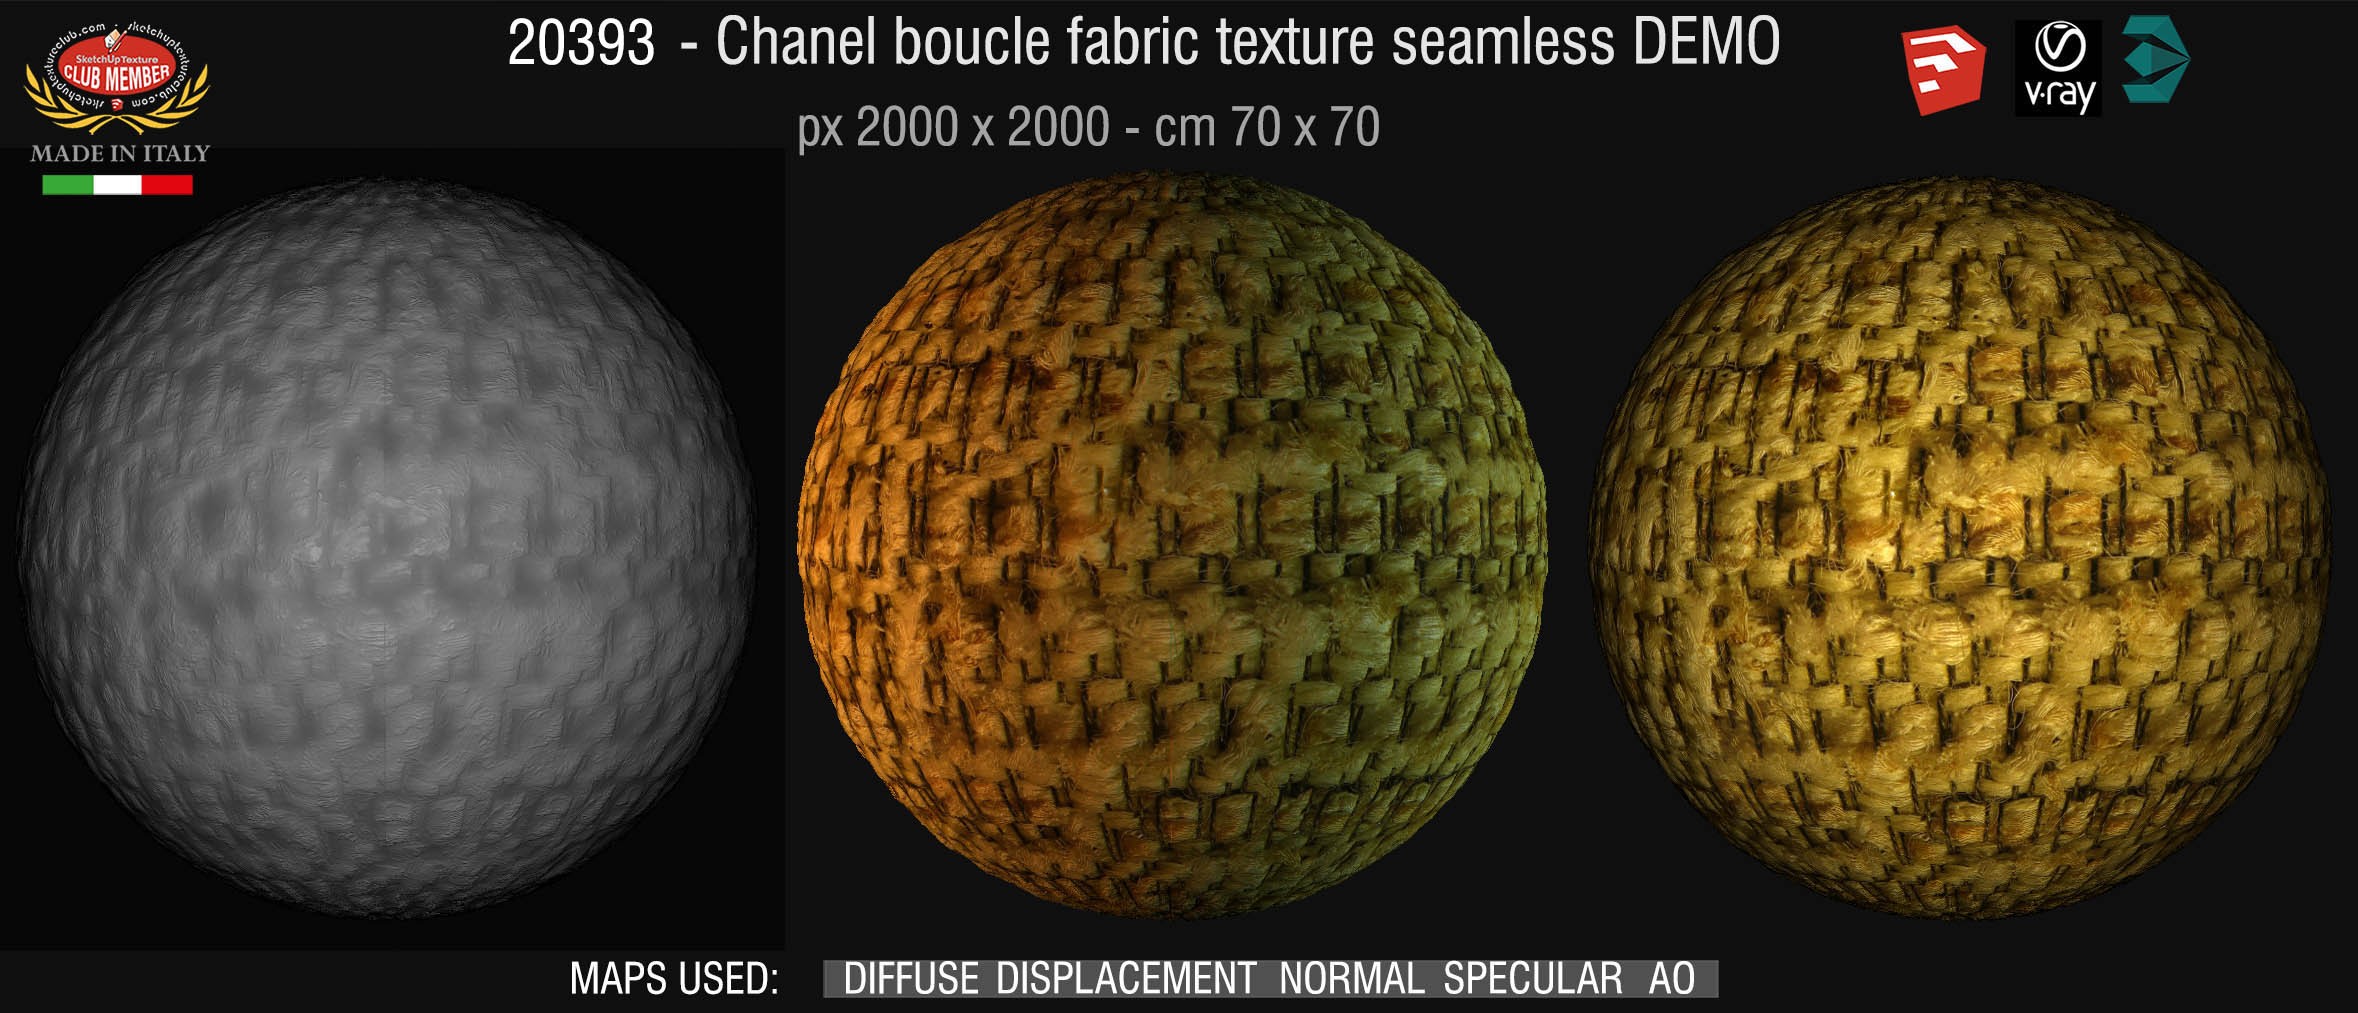 20393 Chanel boucle fabric texture seamless + maps DEMO